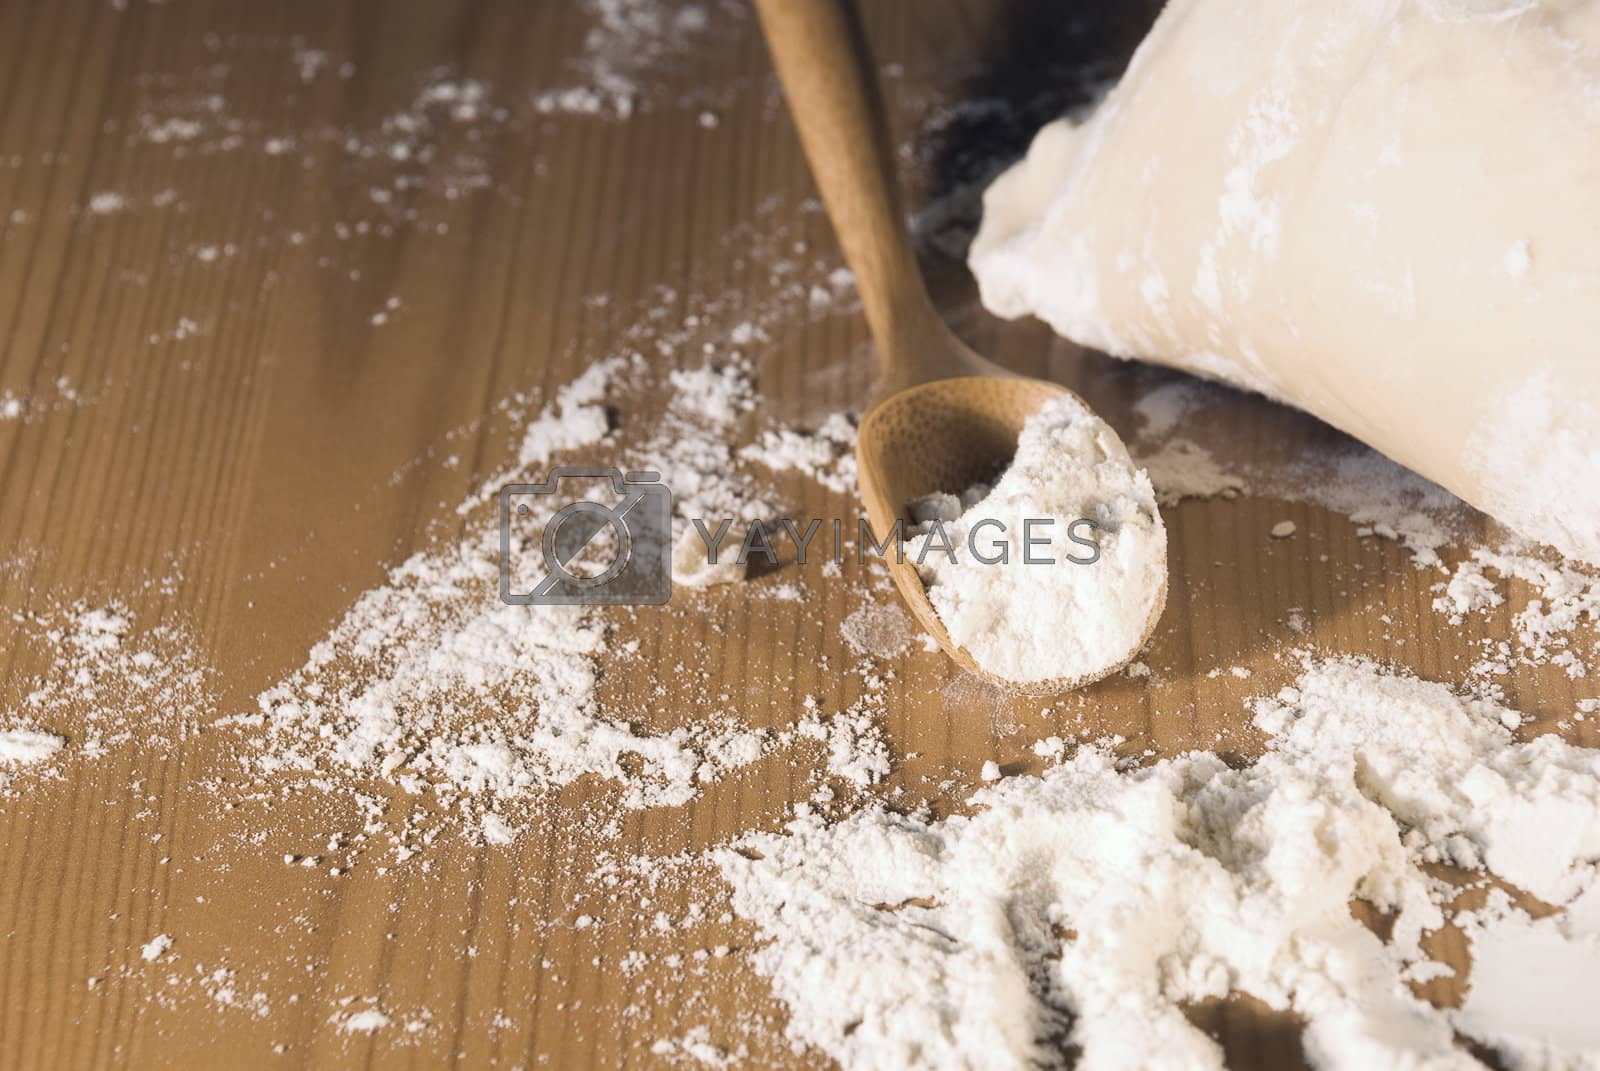 Royalty free image of rolling pin and flour by jannyjus